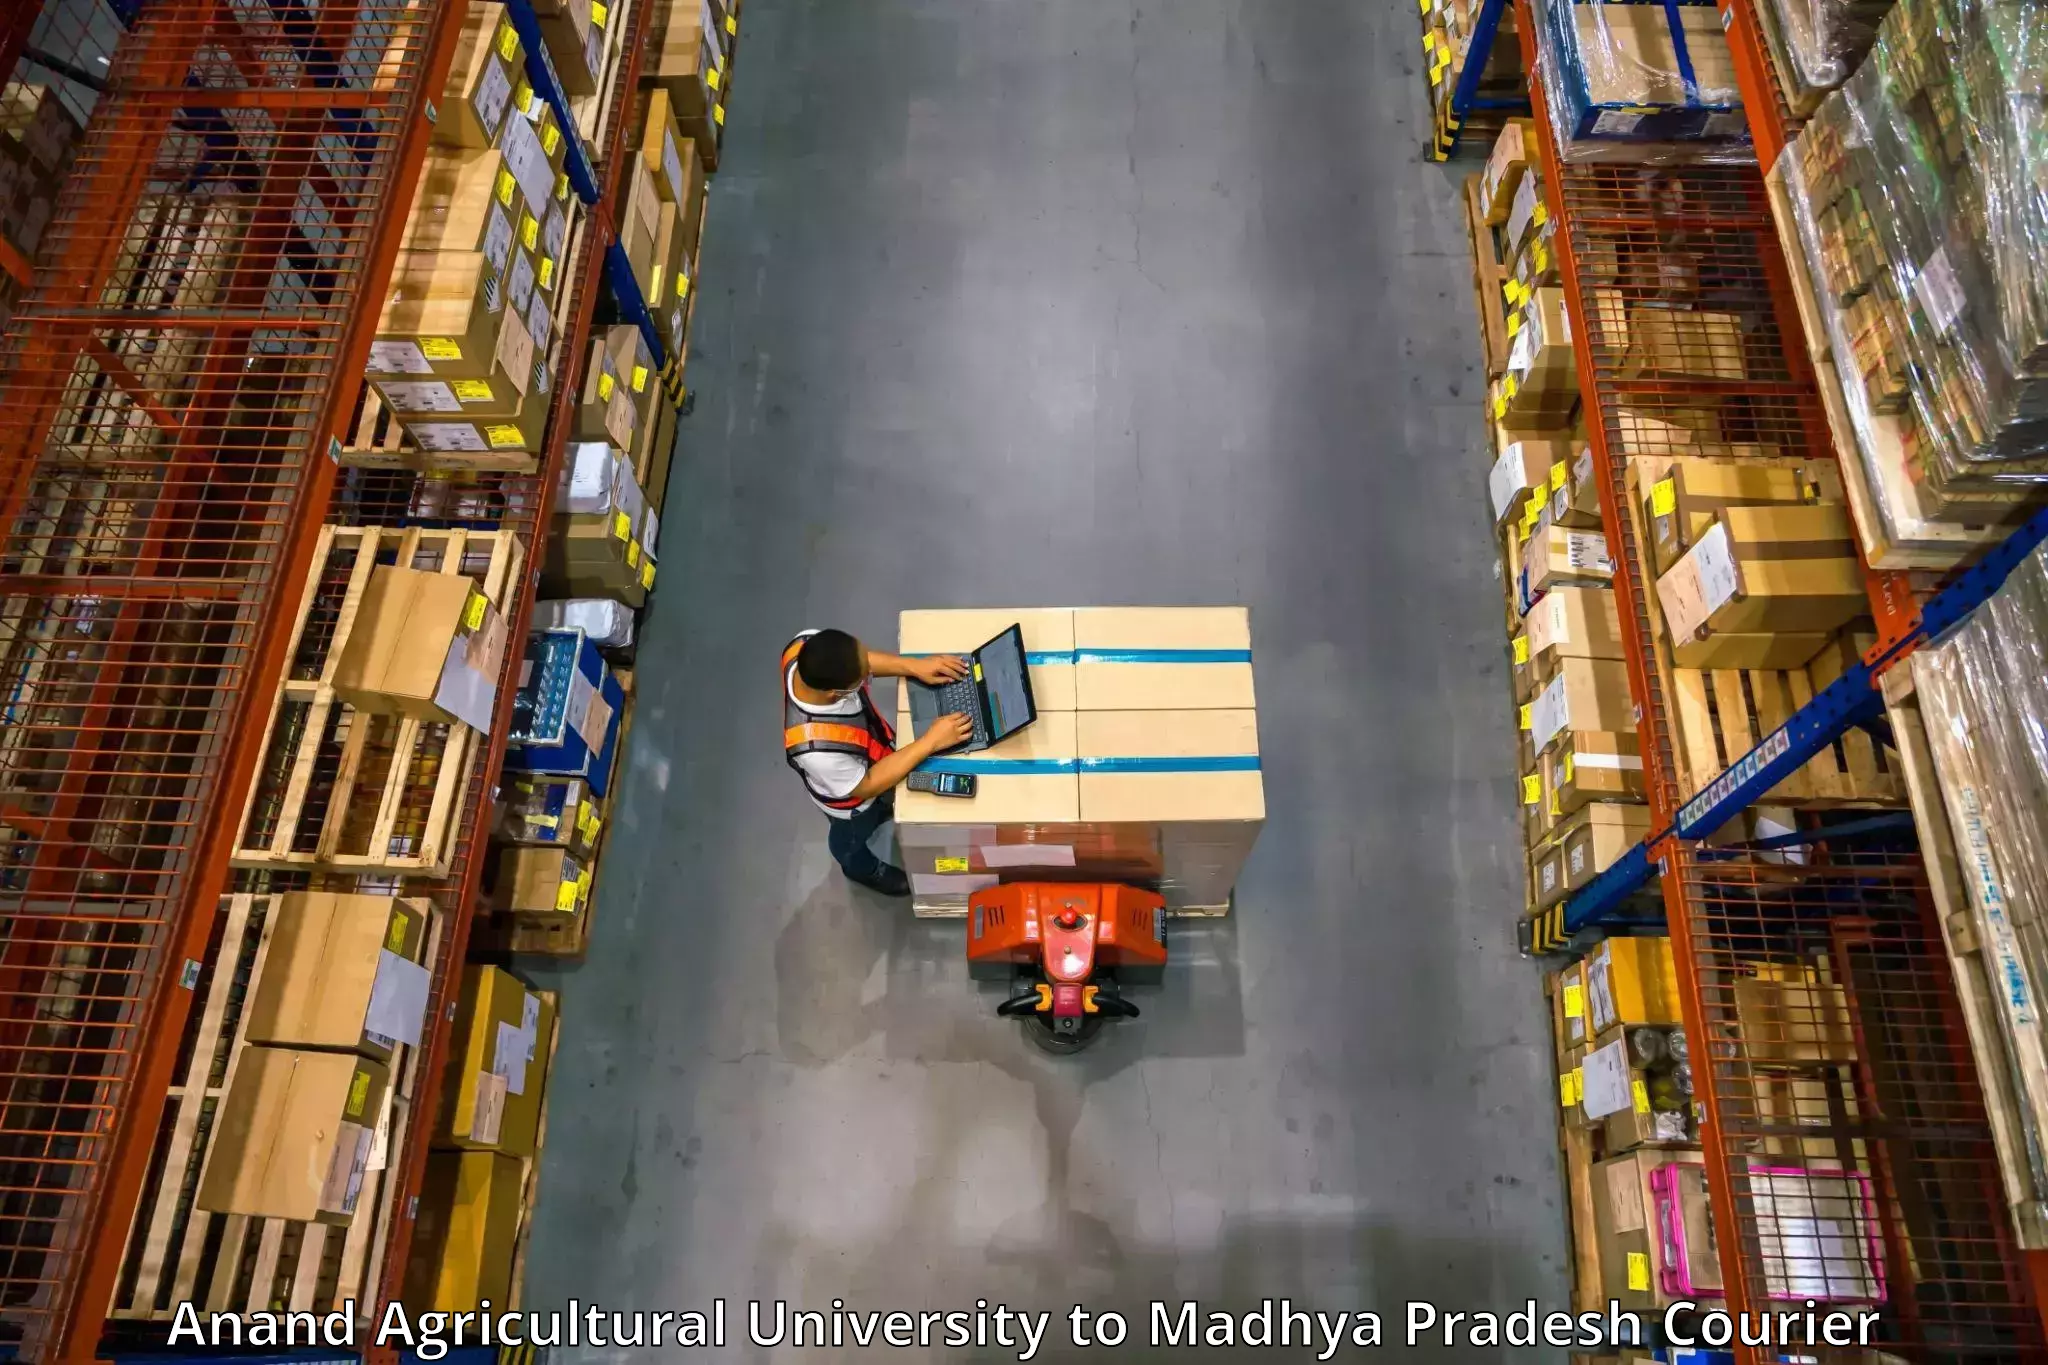 Furniture moving assistance Anand Agricultural University to Shujalpur